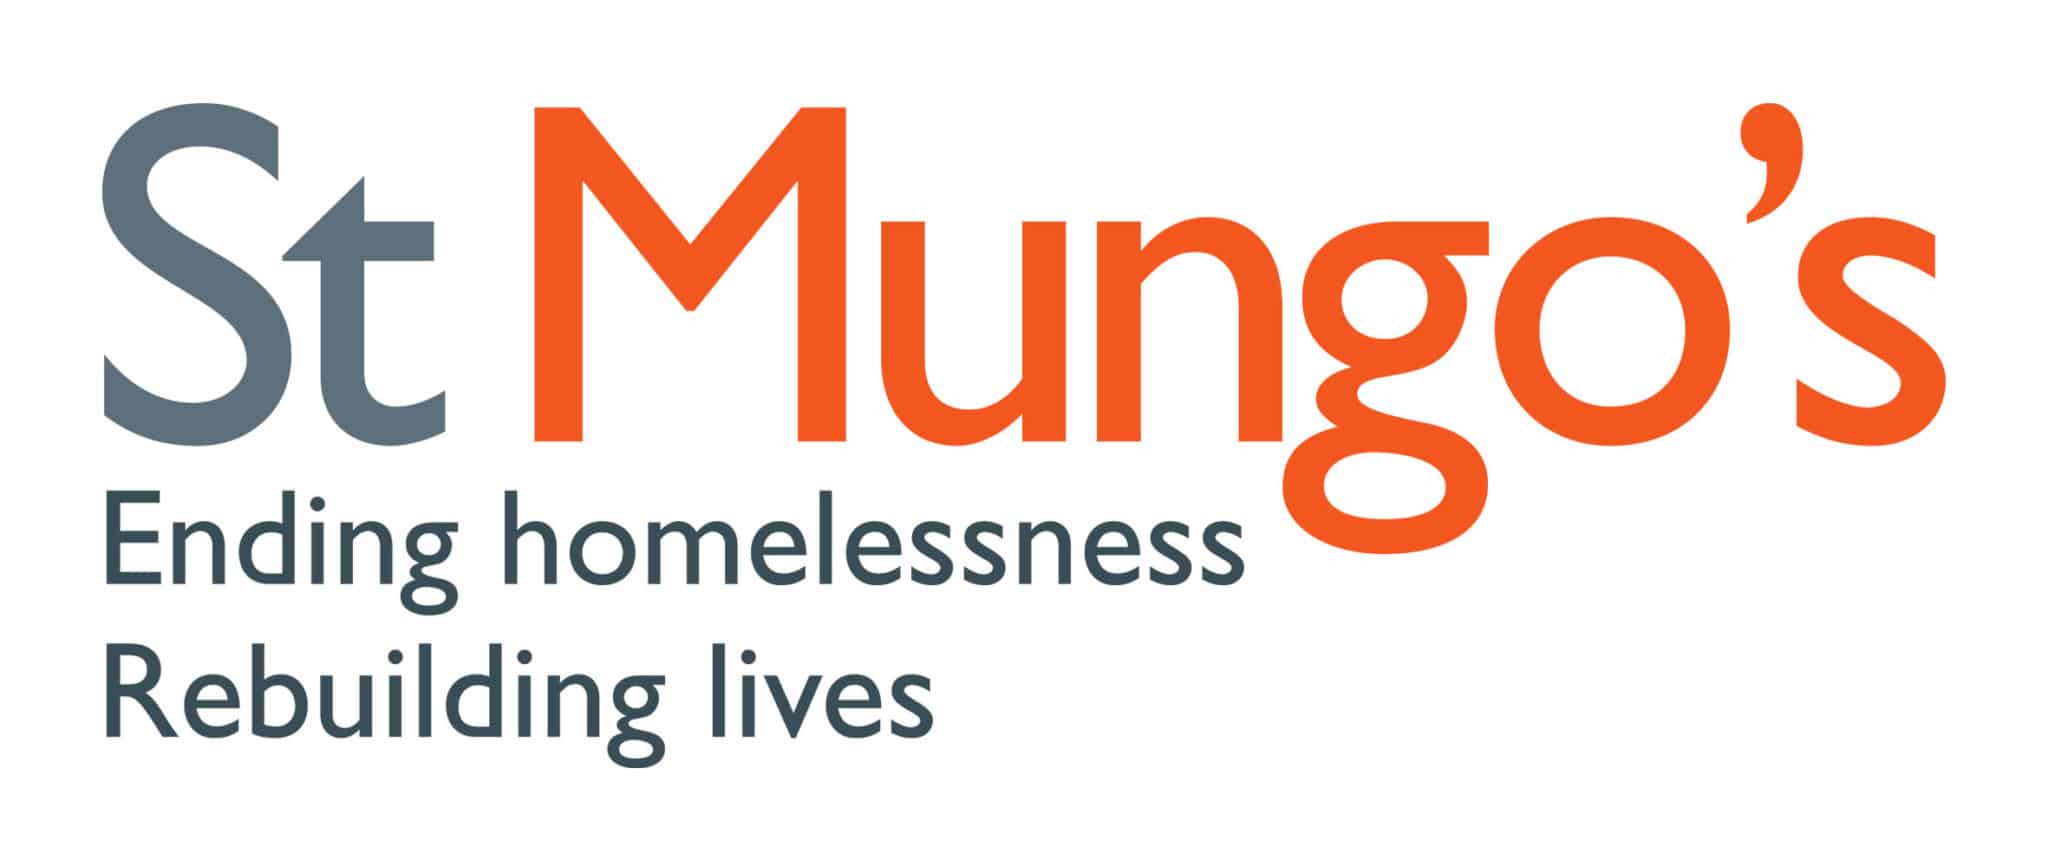 St Mungo's has been nominated for the Third Sector Award at the PinkNews Awards 2020